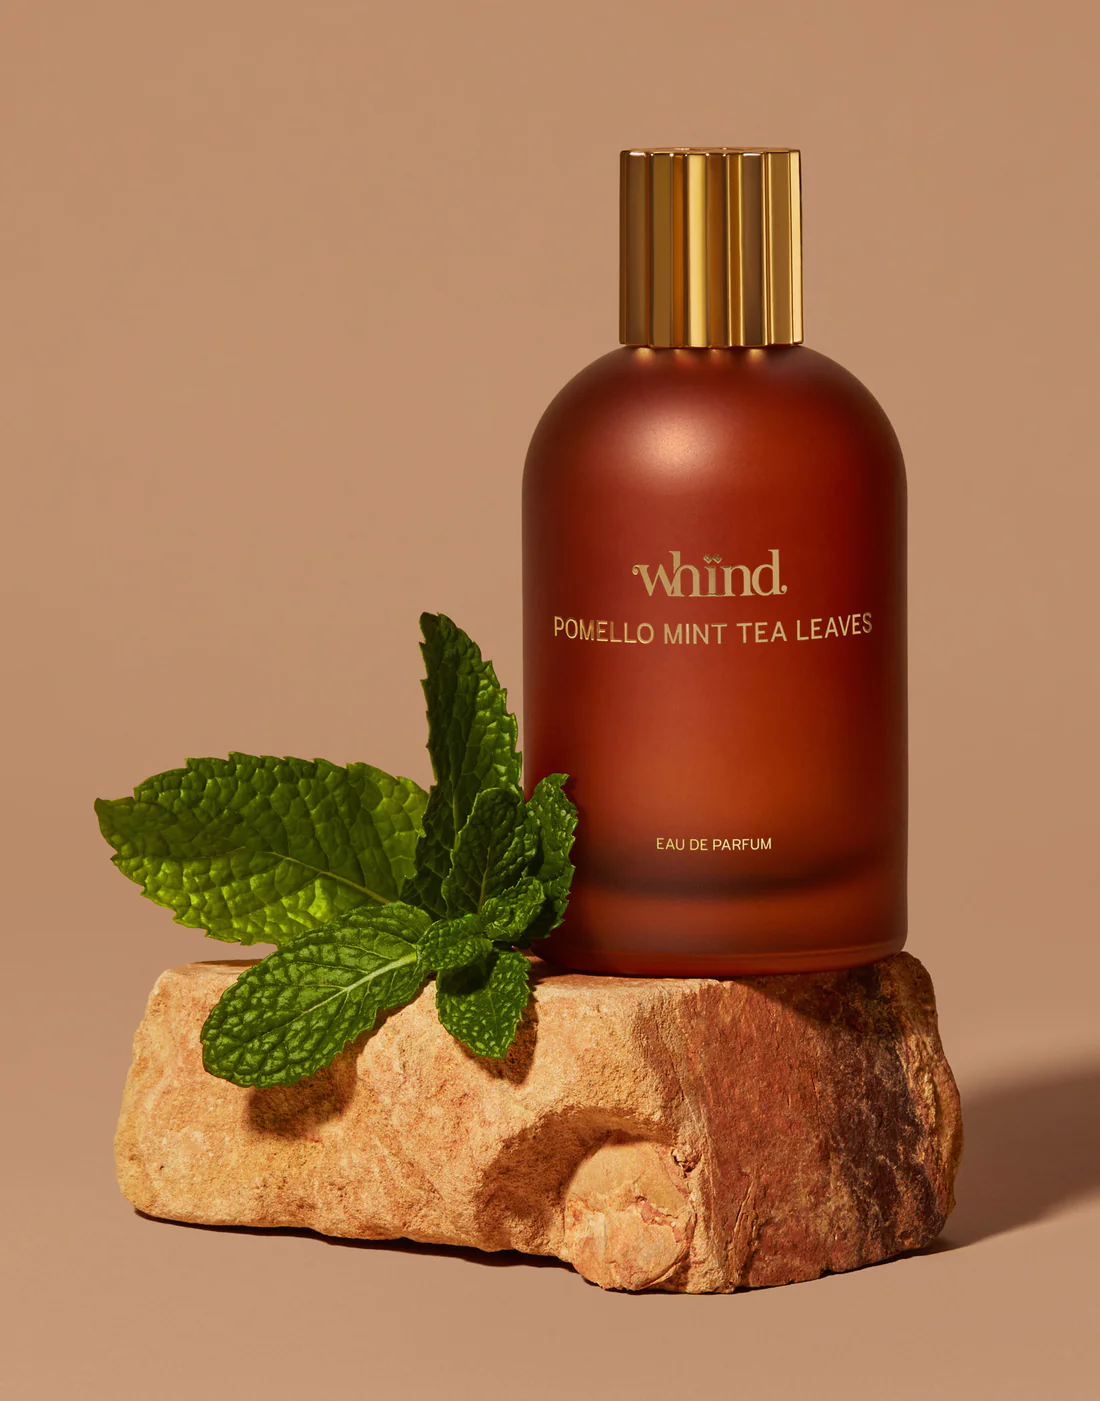 Whind: From Morocco Inspired Skin Care to Fragrance ~ Fragrance News